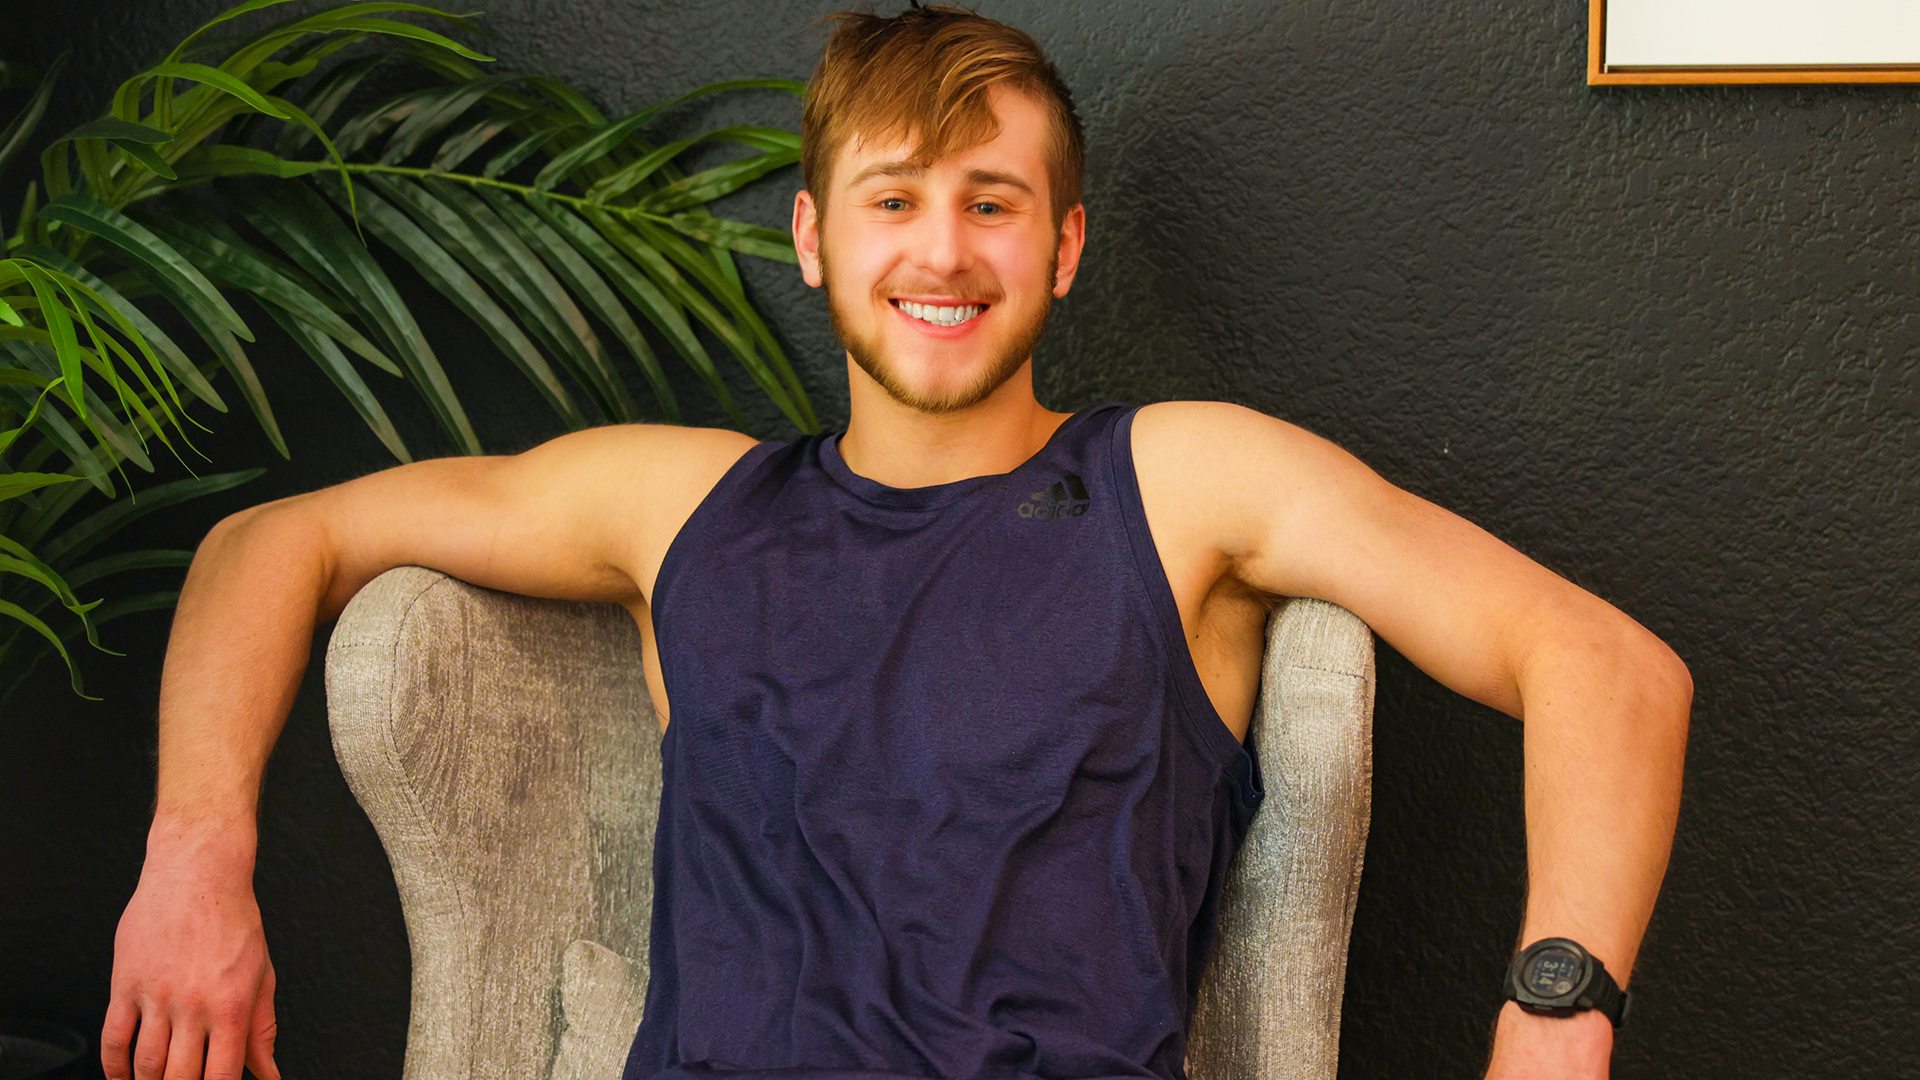 Interview with Brock Fisher: How A Country Guy Turned Model!